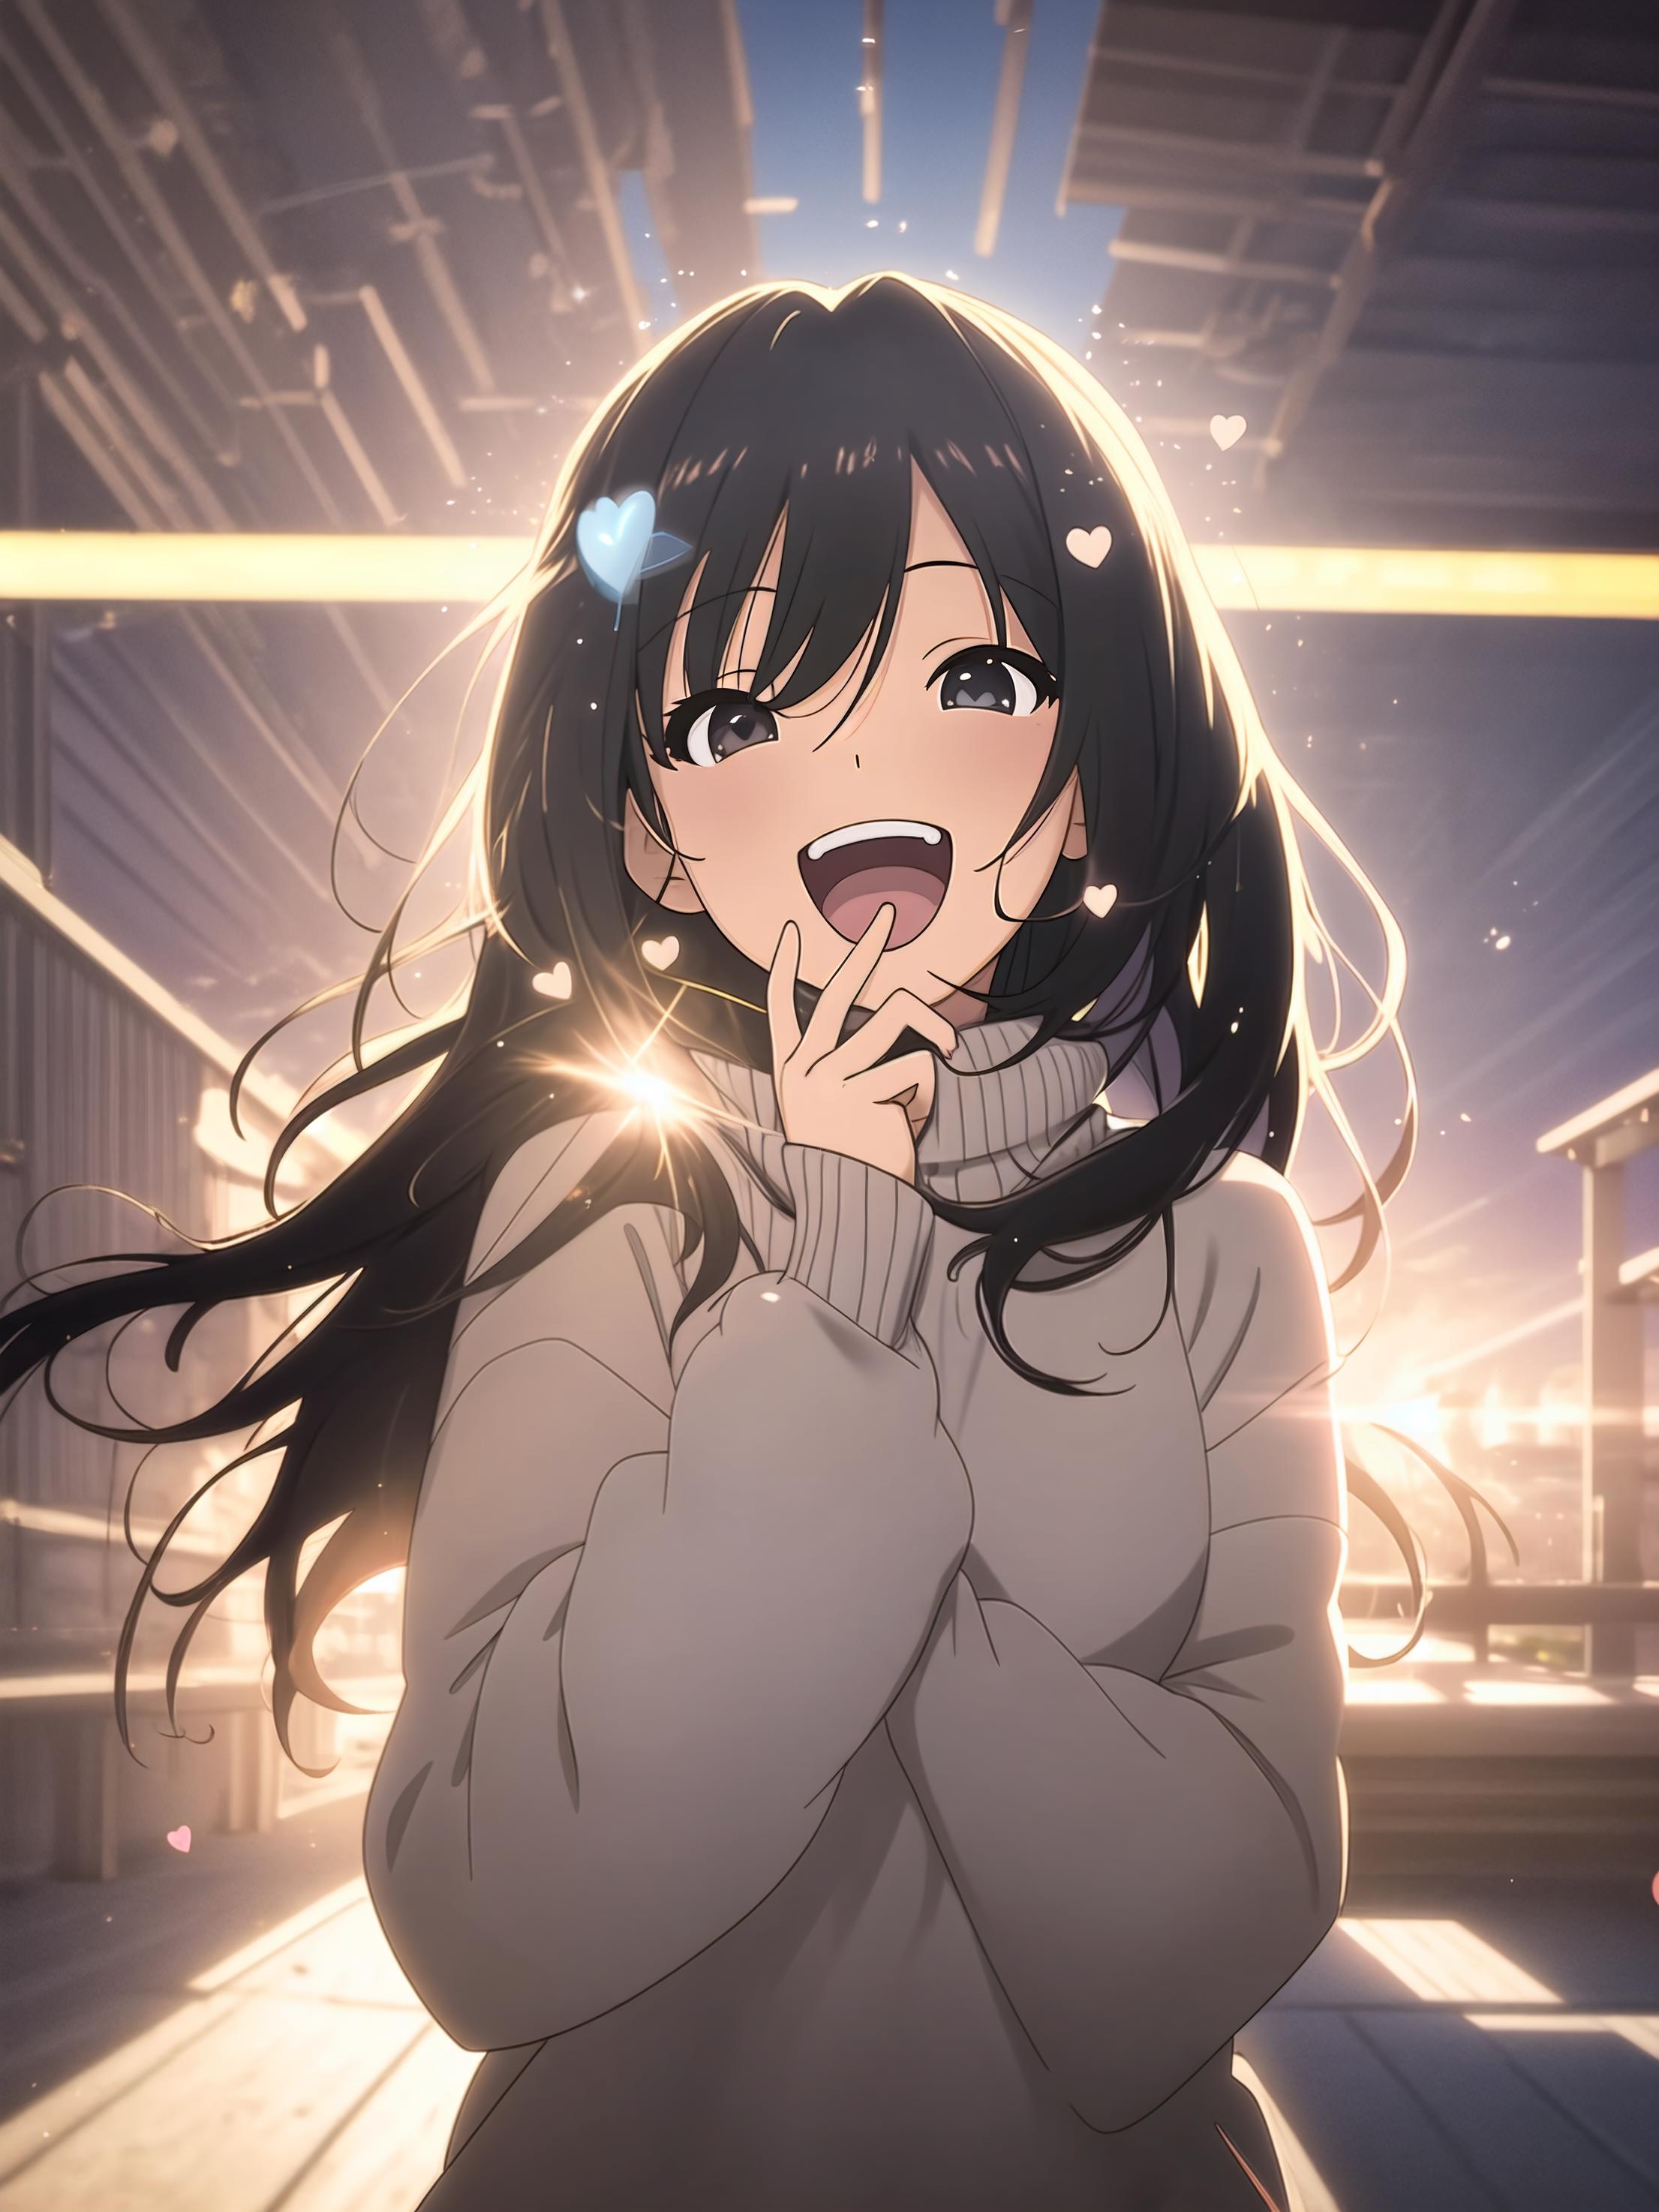 A happy girl with black hair wearing a white sweater.